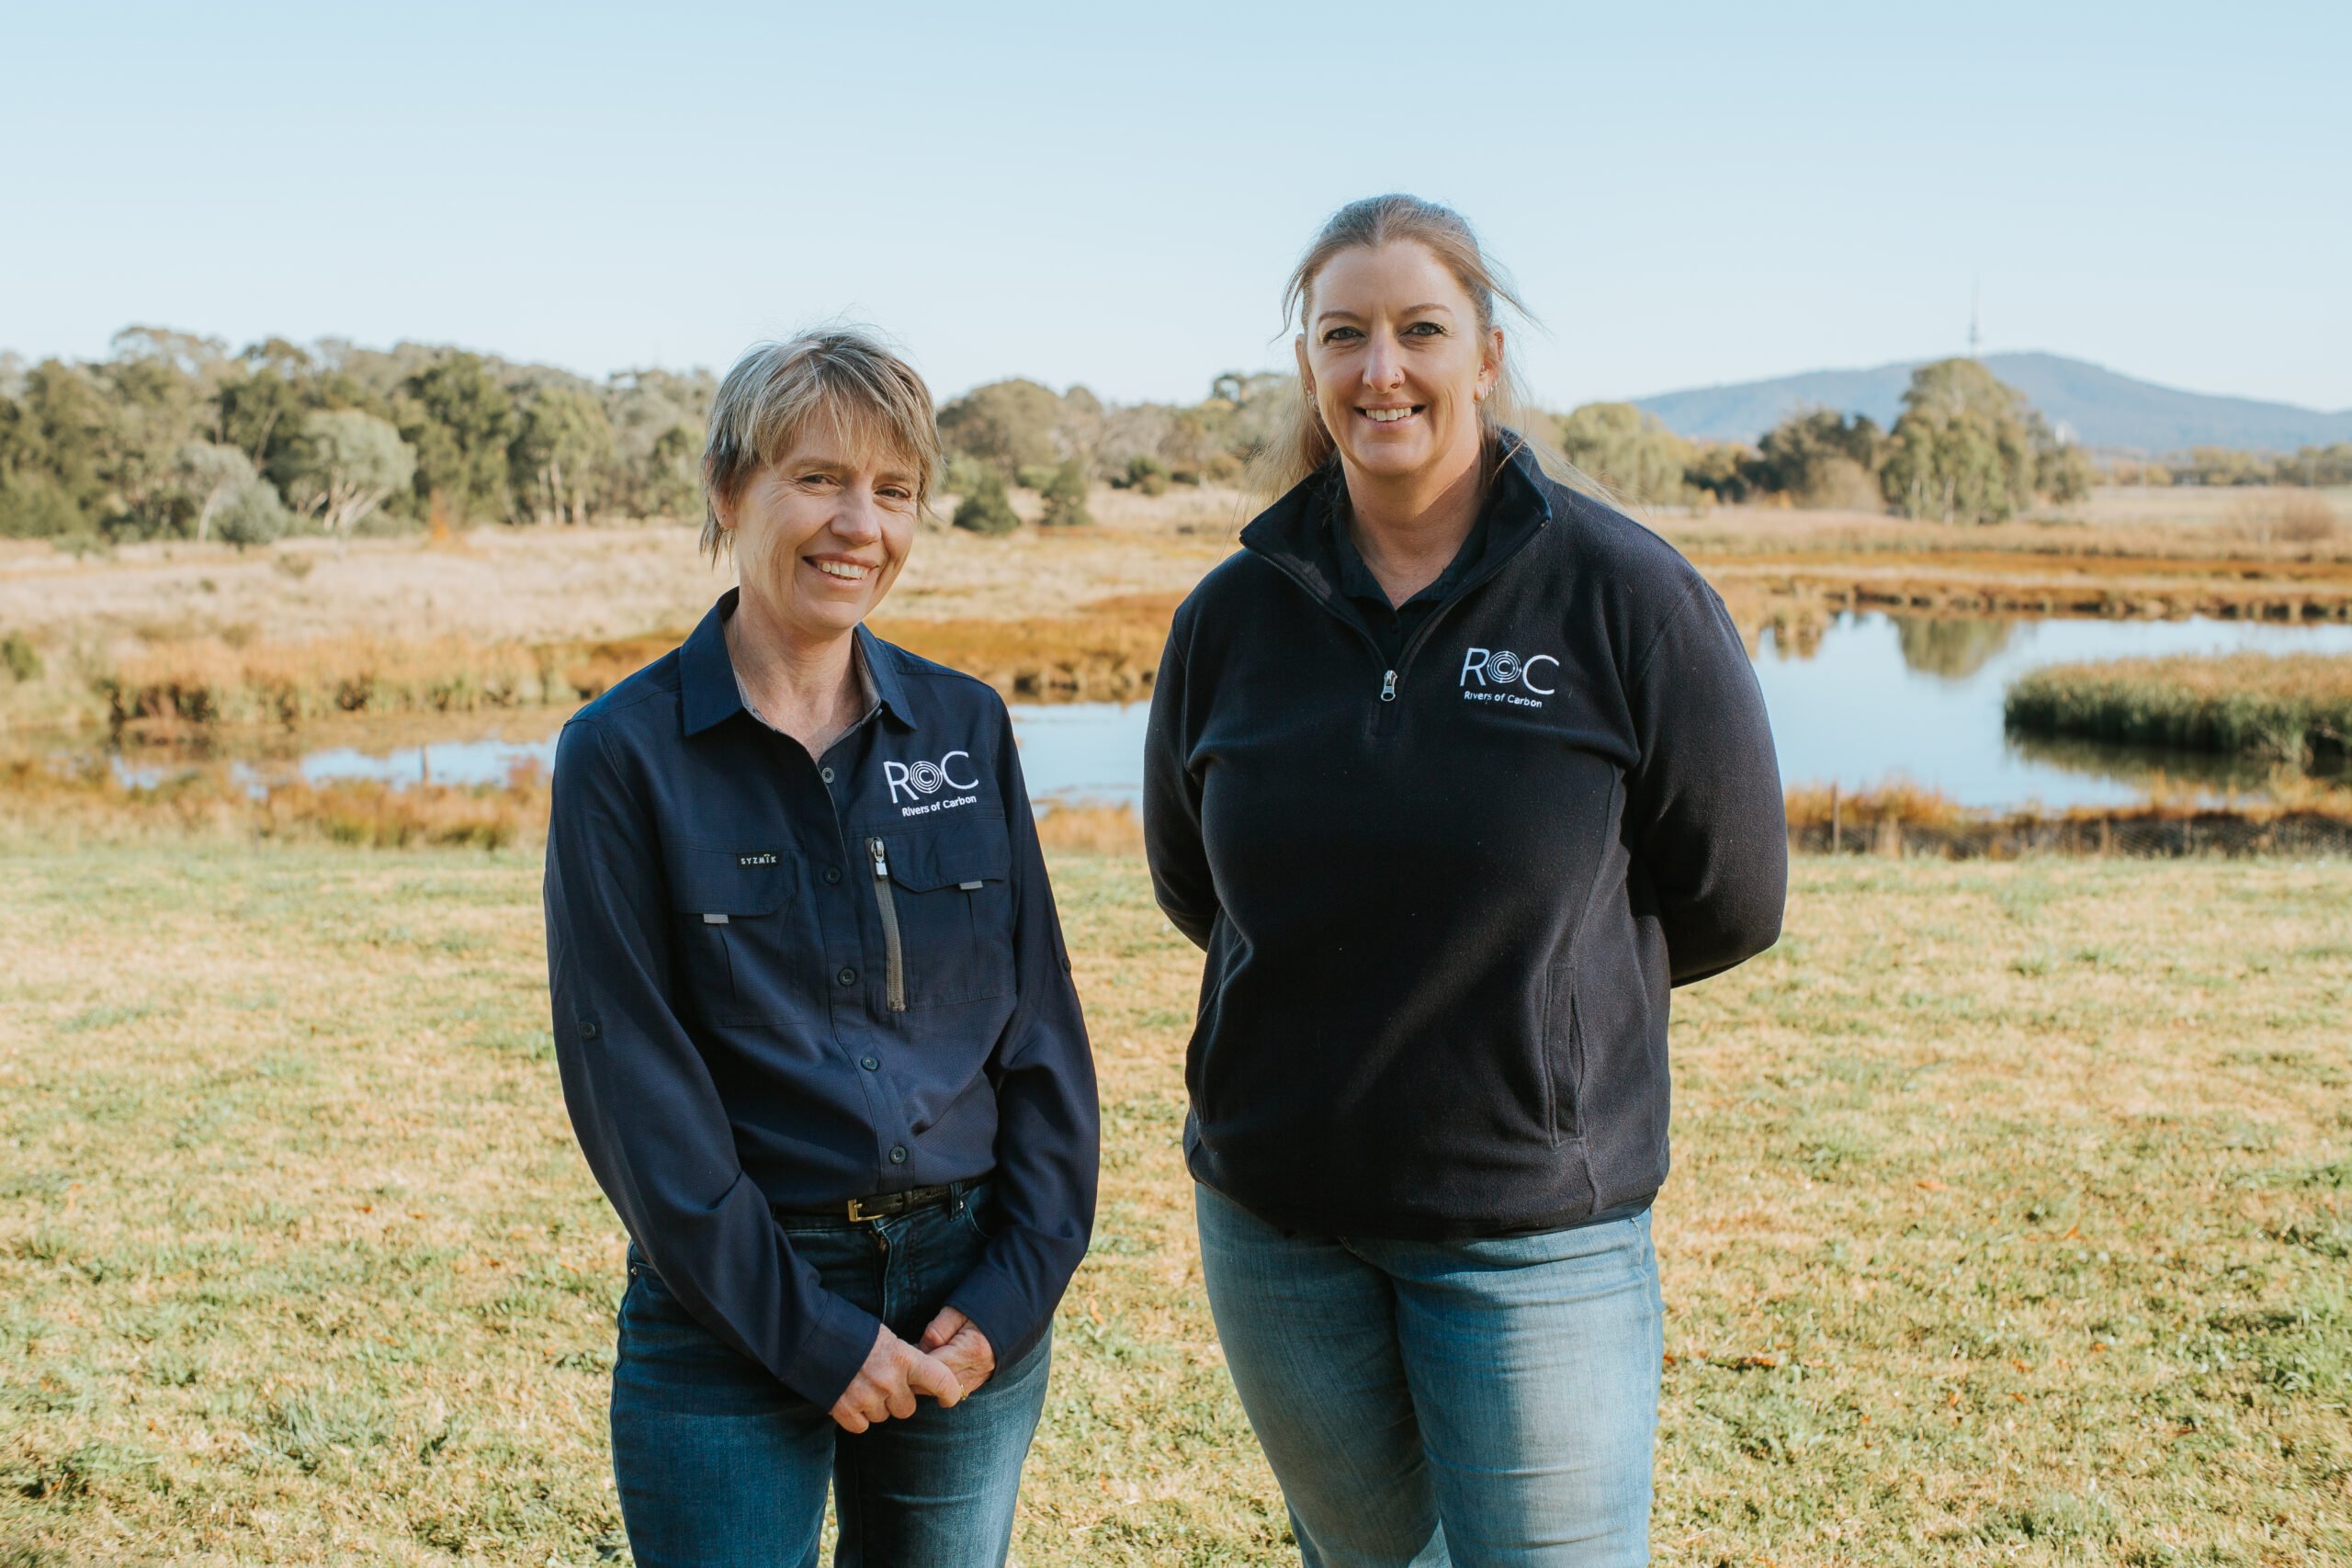 Rivers of Carbon Project Manager Lori Gould and Project Officer Alex James stand side-by-side smiling at Jerrabomberra Wetlands.